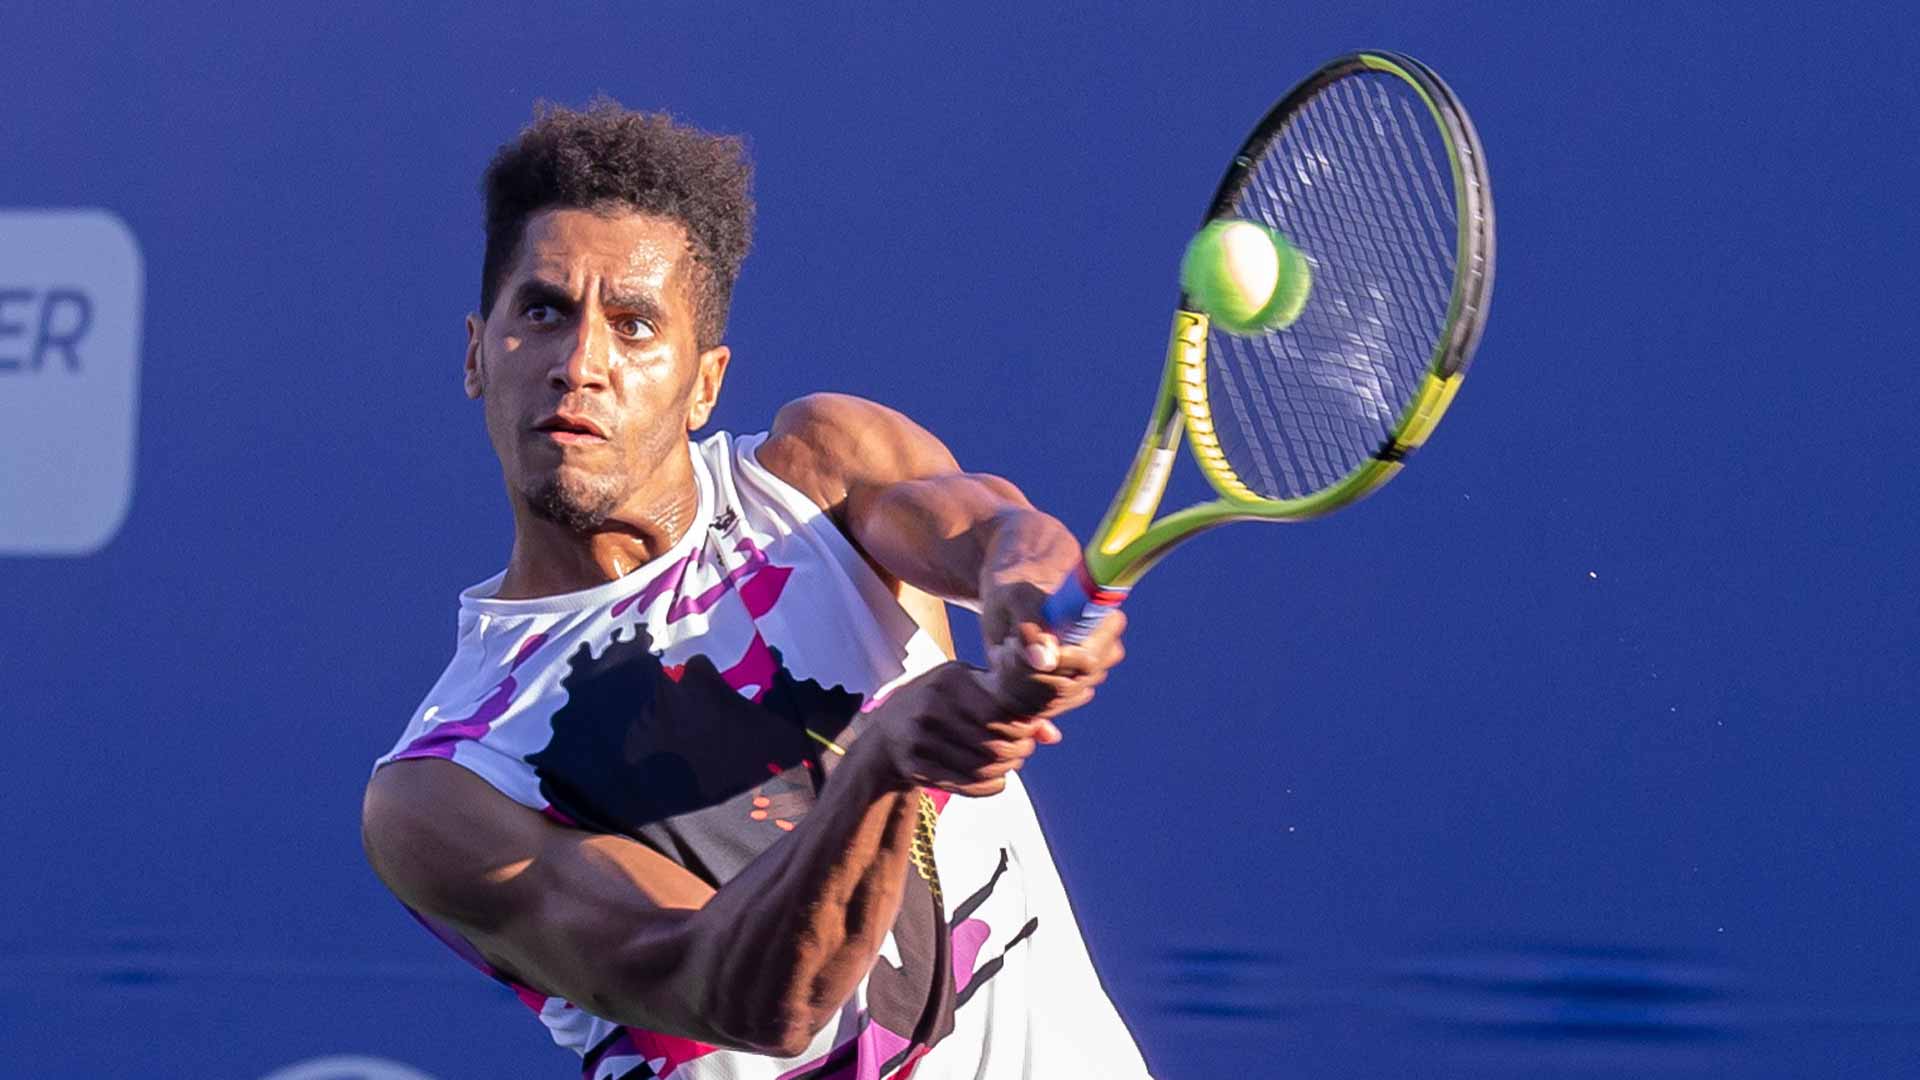 American <a href='https://www.atptour.com/en/players/michael-mmoh/mp01/overview'>Michael Mmoh</a> claims the Cary Challenger.